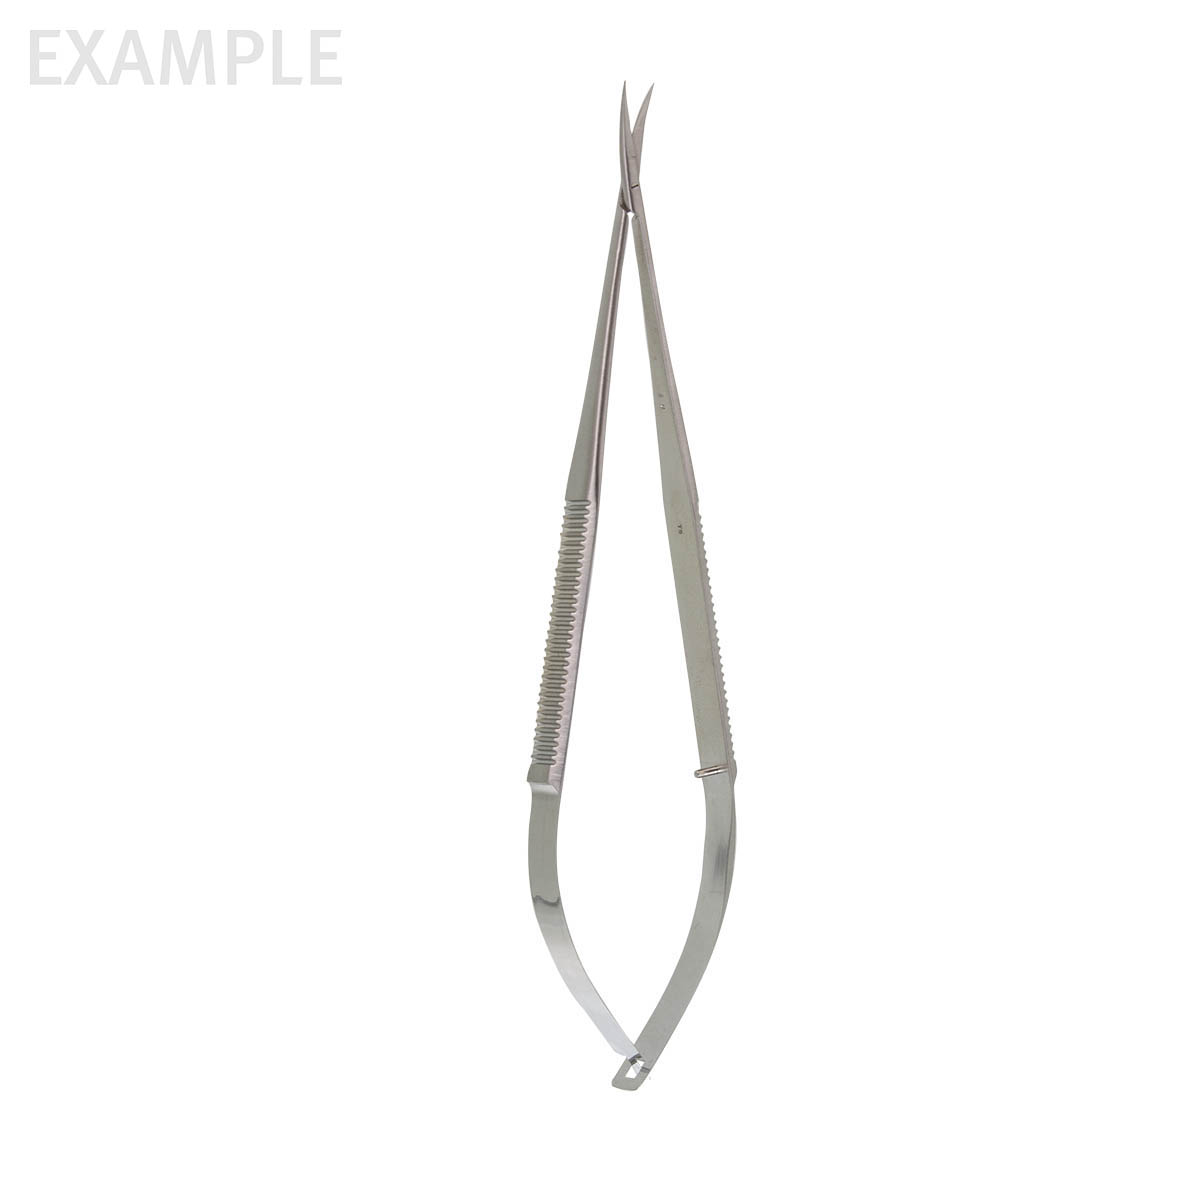 Joseph scissors, 6'',curved Superior-Cut blades, micro serrated lower  blade, sharp tips, frosted ring handle